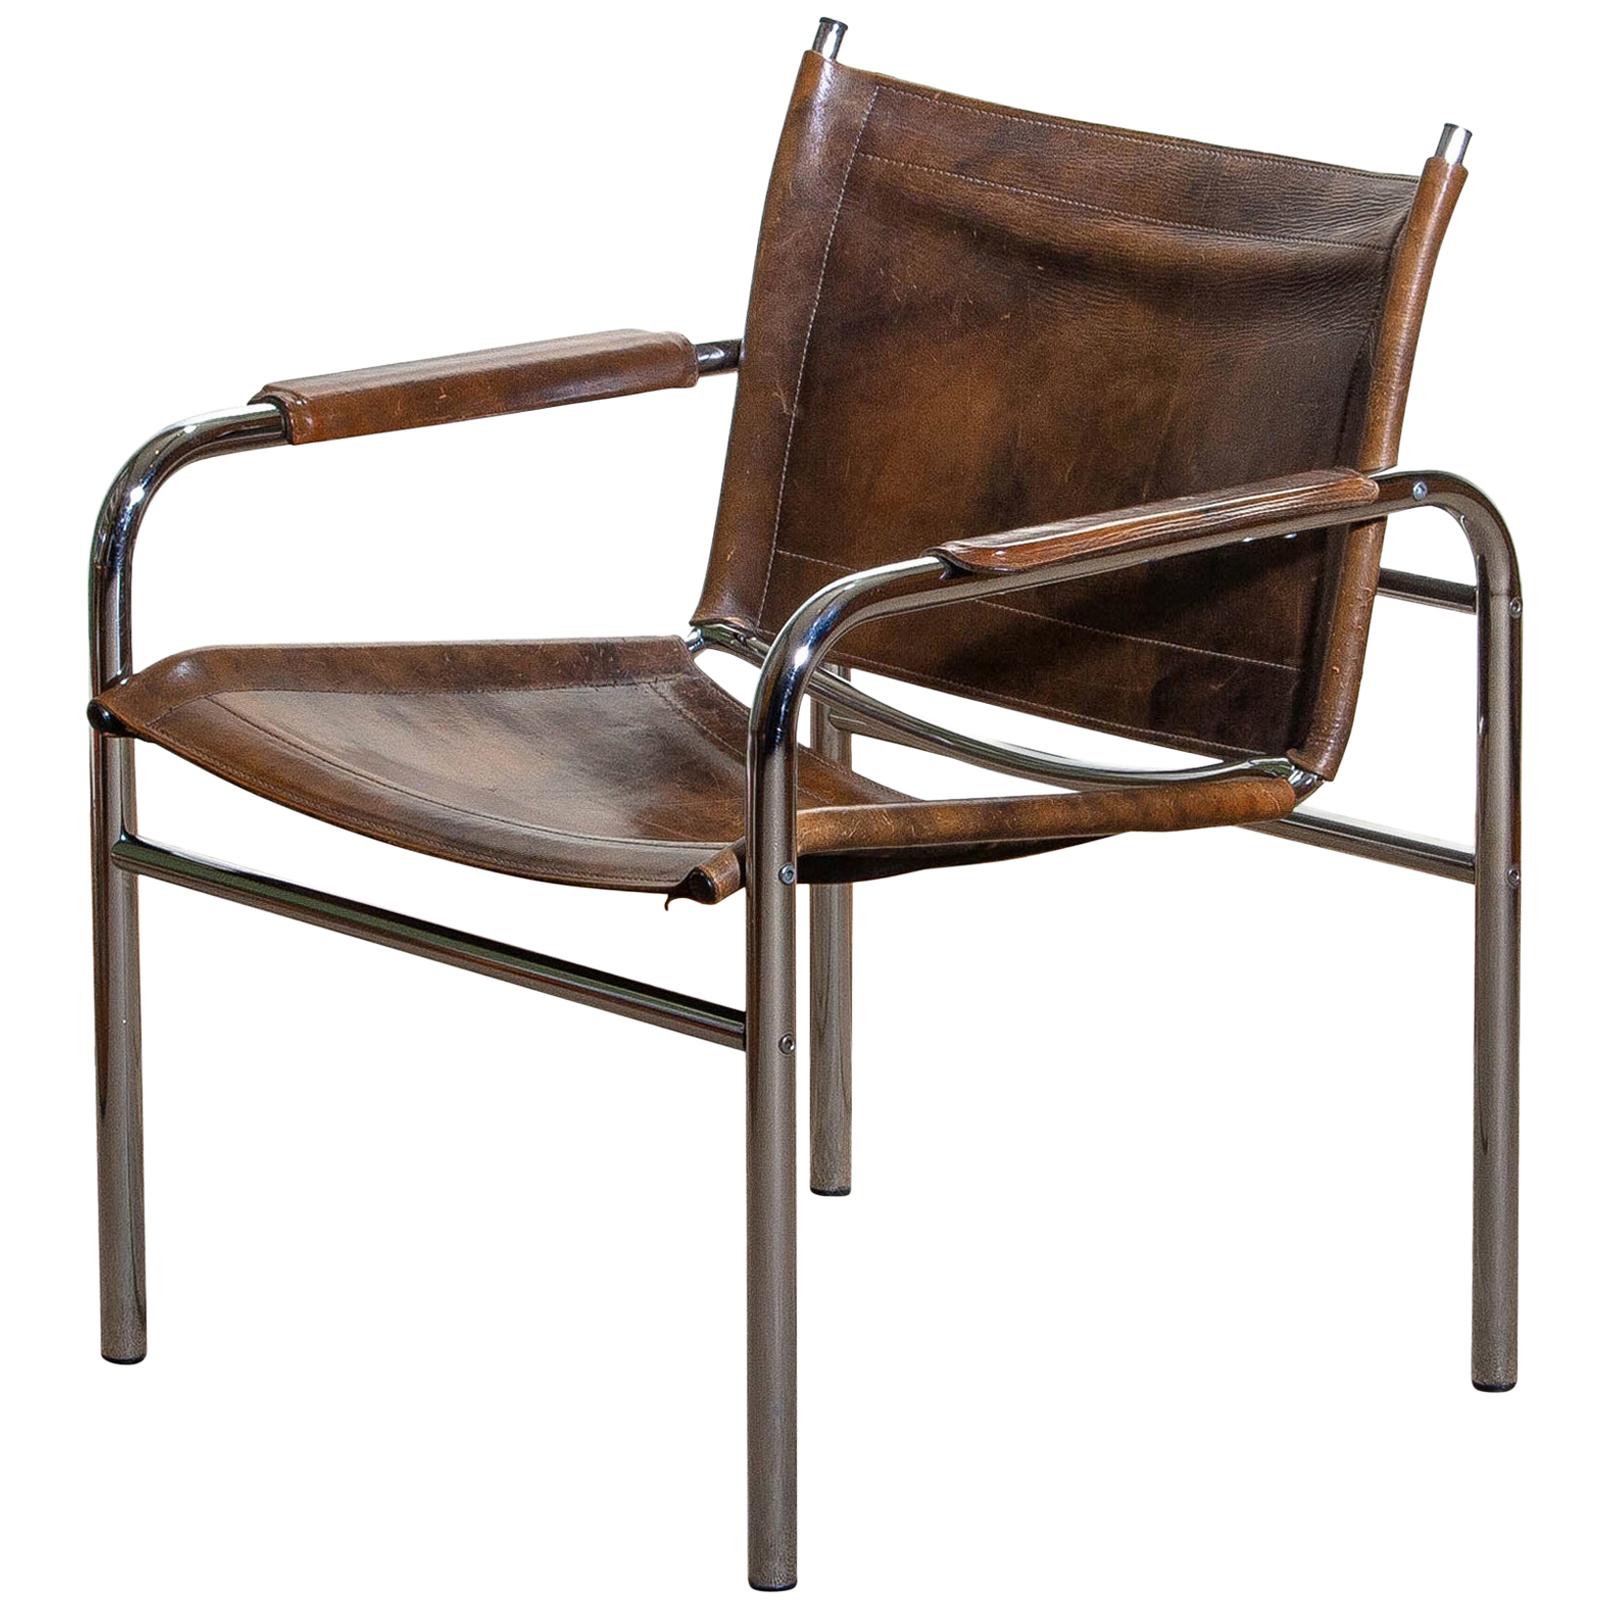 Beautiful armchair, model Klinte, designed by Tord Bjorklund, Sweden. The chair has a tubular chromed steel frame with brown-taupe leather back or seating and armrests with a beautiful patina.
Period: 1980.

Note: We have two of these chairs in